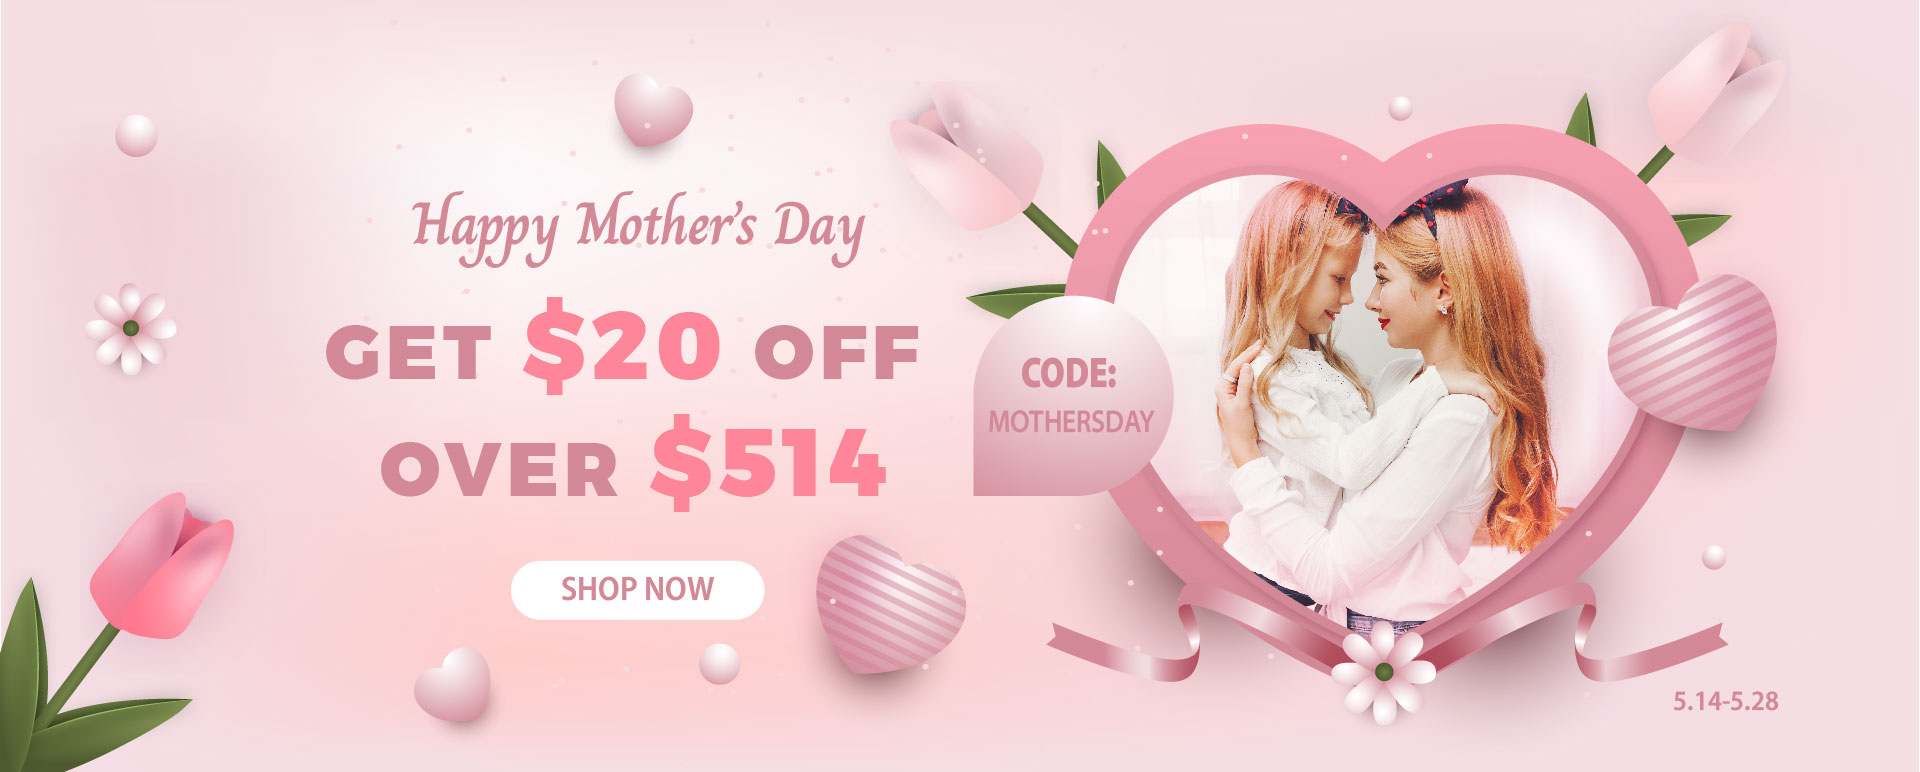 Home Mother's Day banner